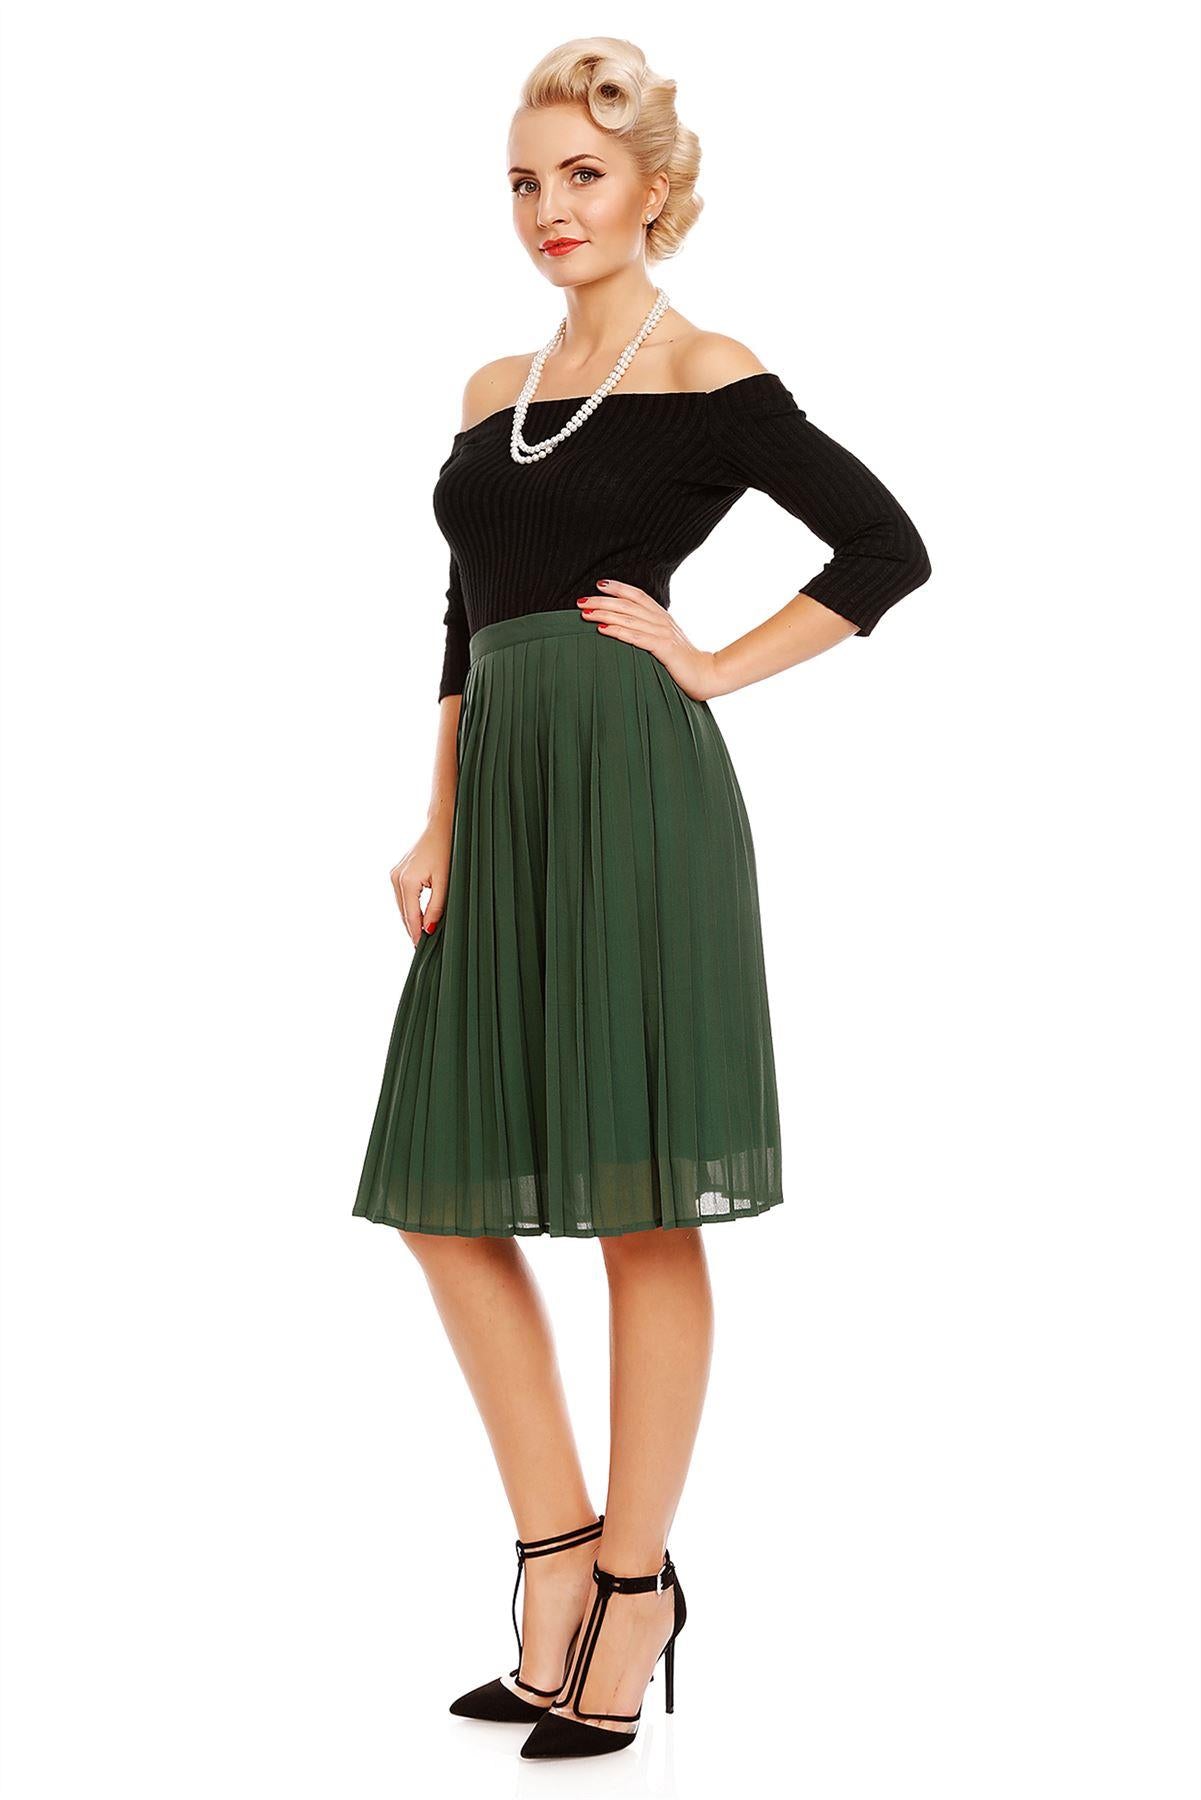 Model wearing our Gloria off-shoulder long sleeve top in black, with a green skirt, side view